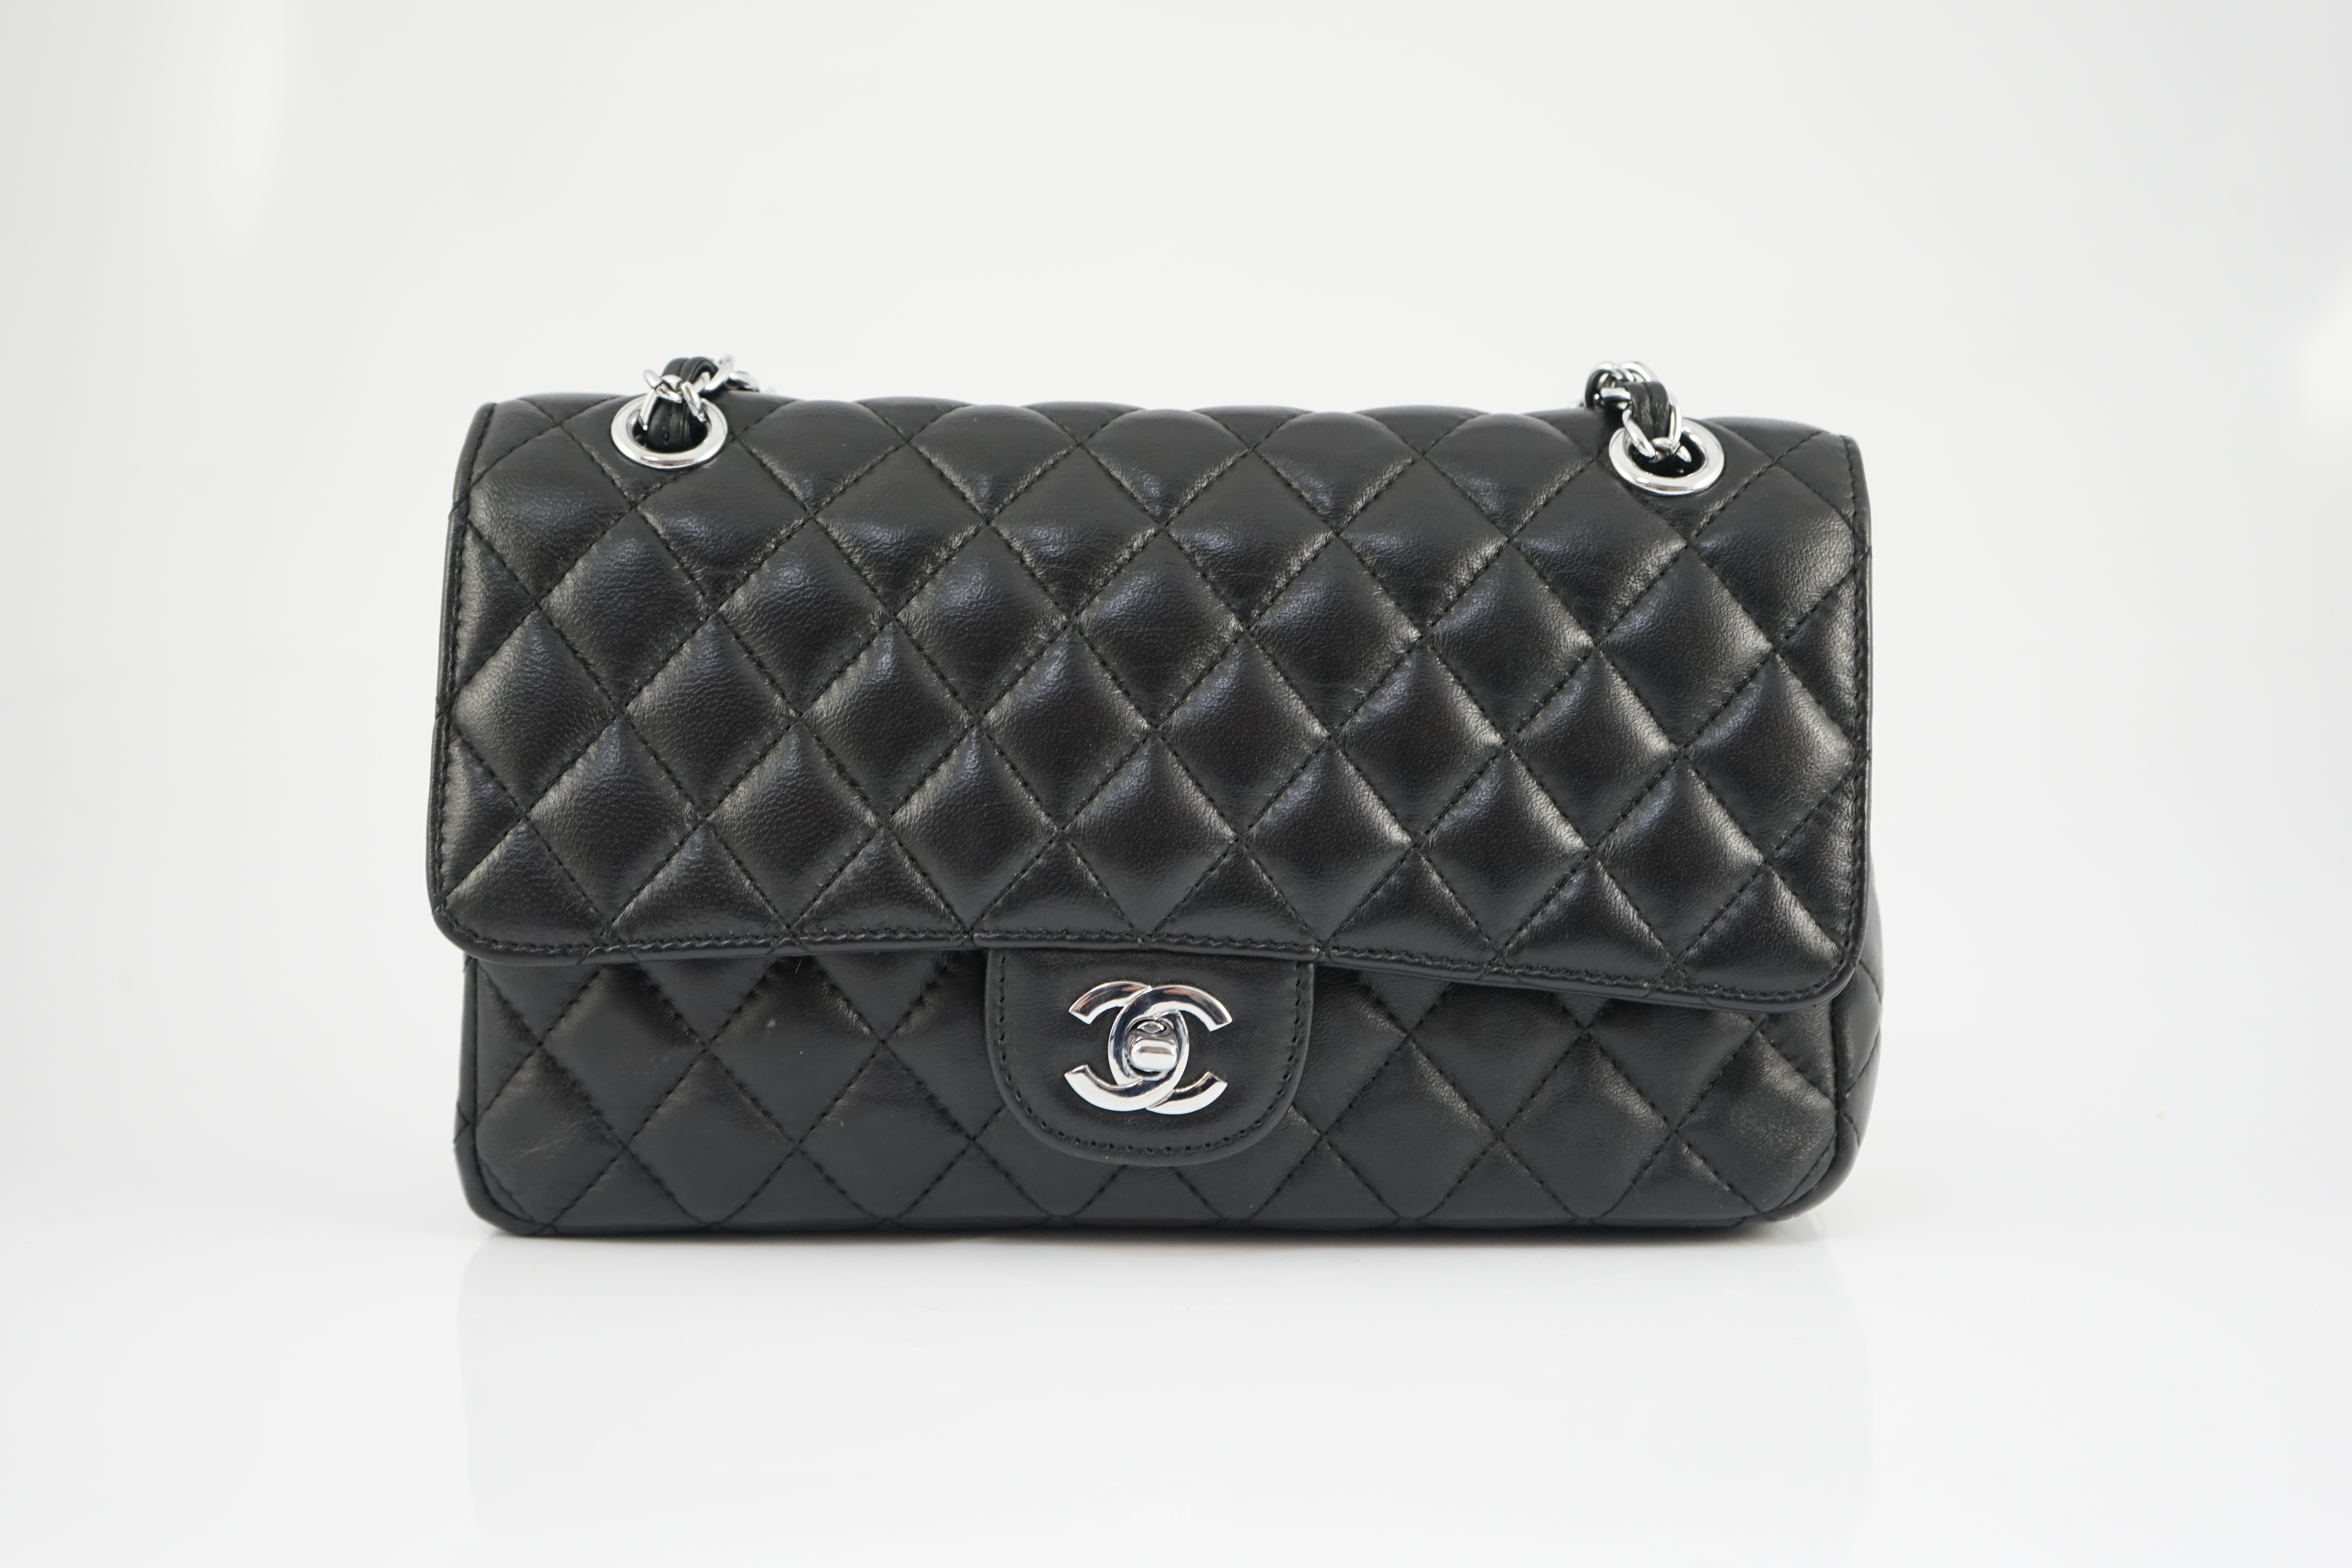 A Chanel classic black quilted leather shoulder bag width 25.5cm, depth 7cm, height 16cm